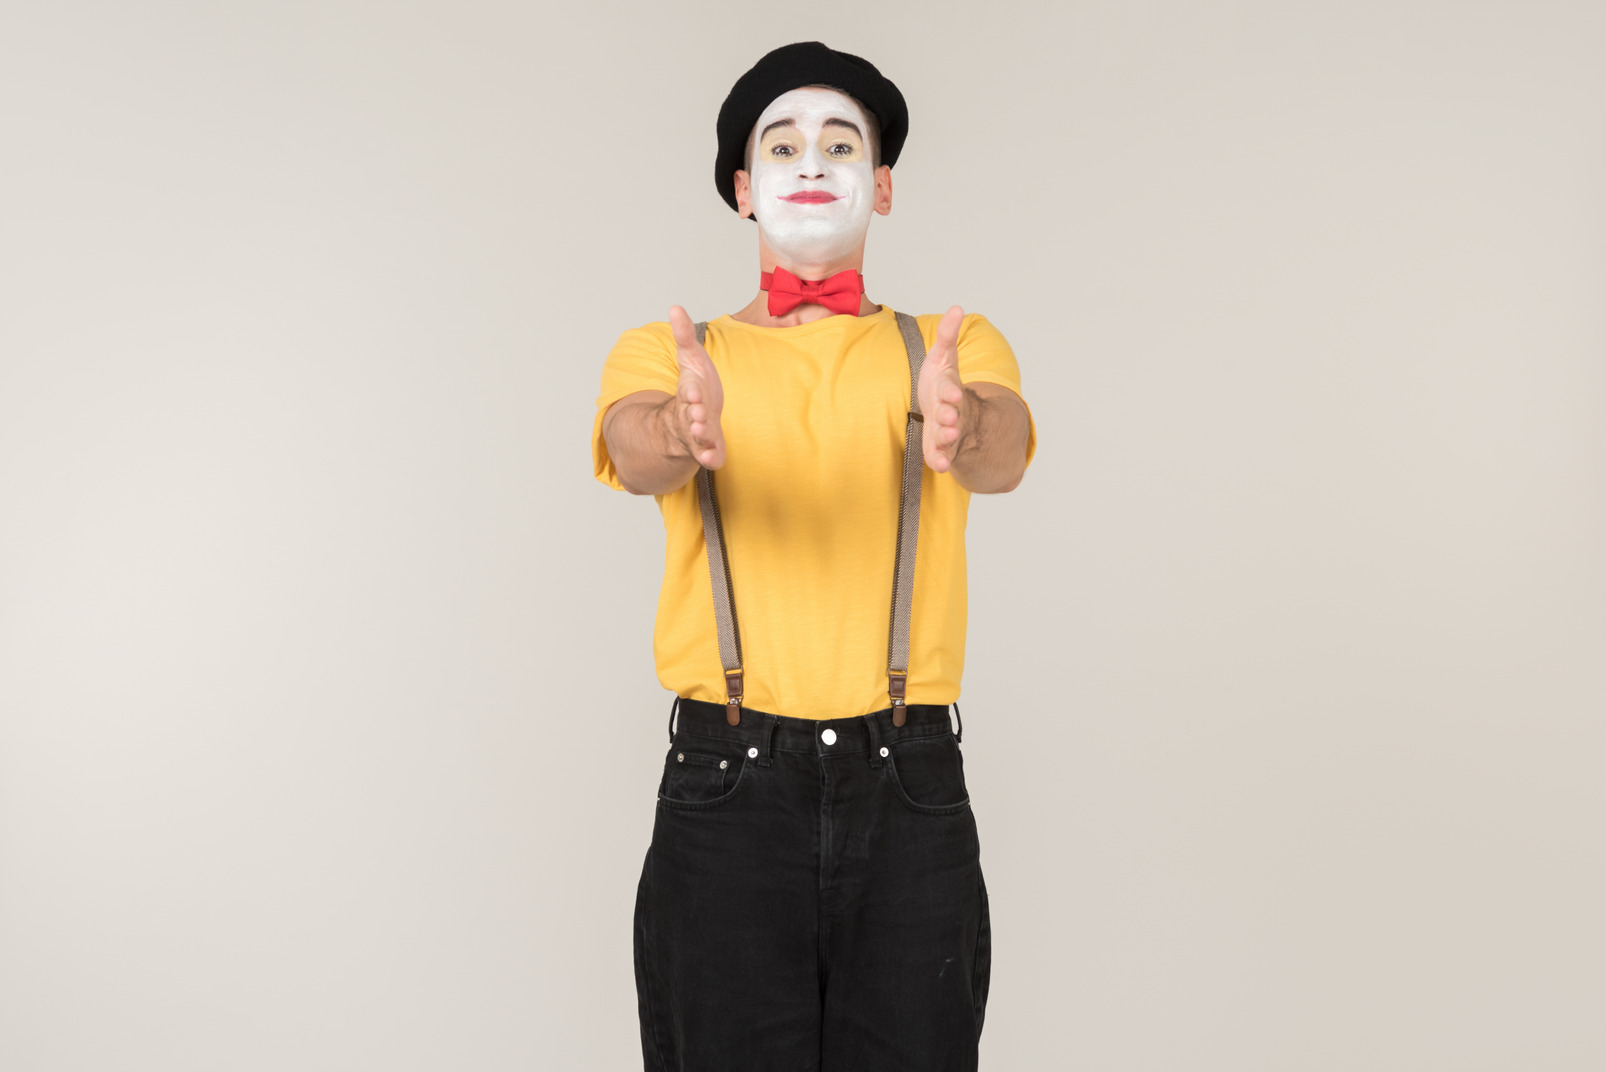 Smiling mime pointing forward with both hands